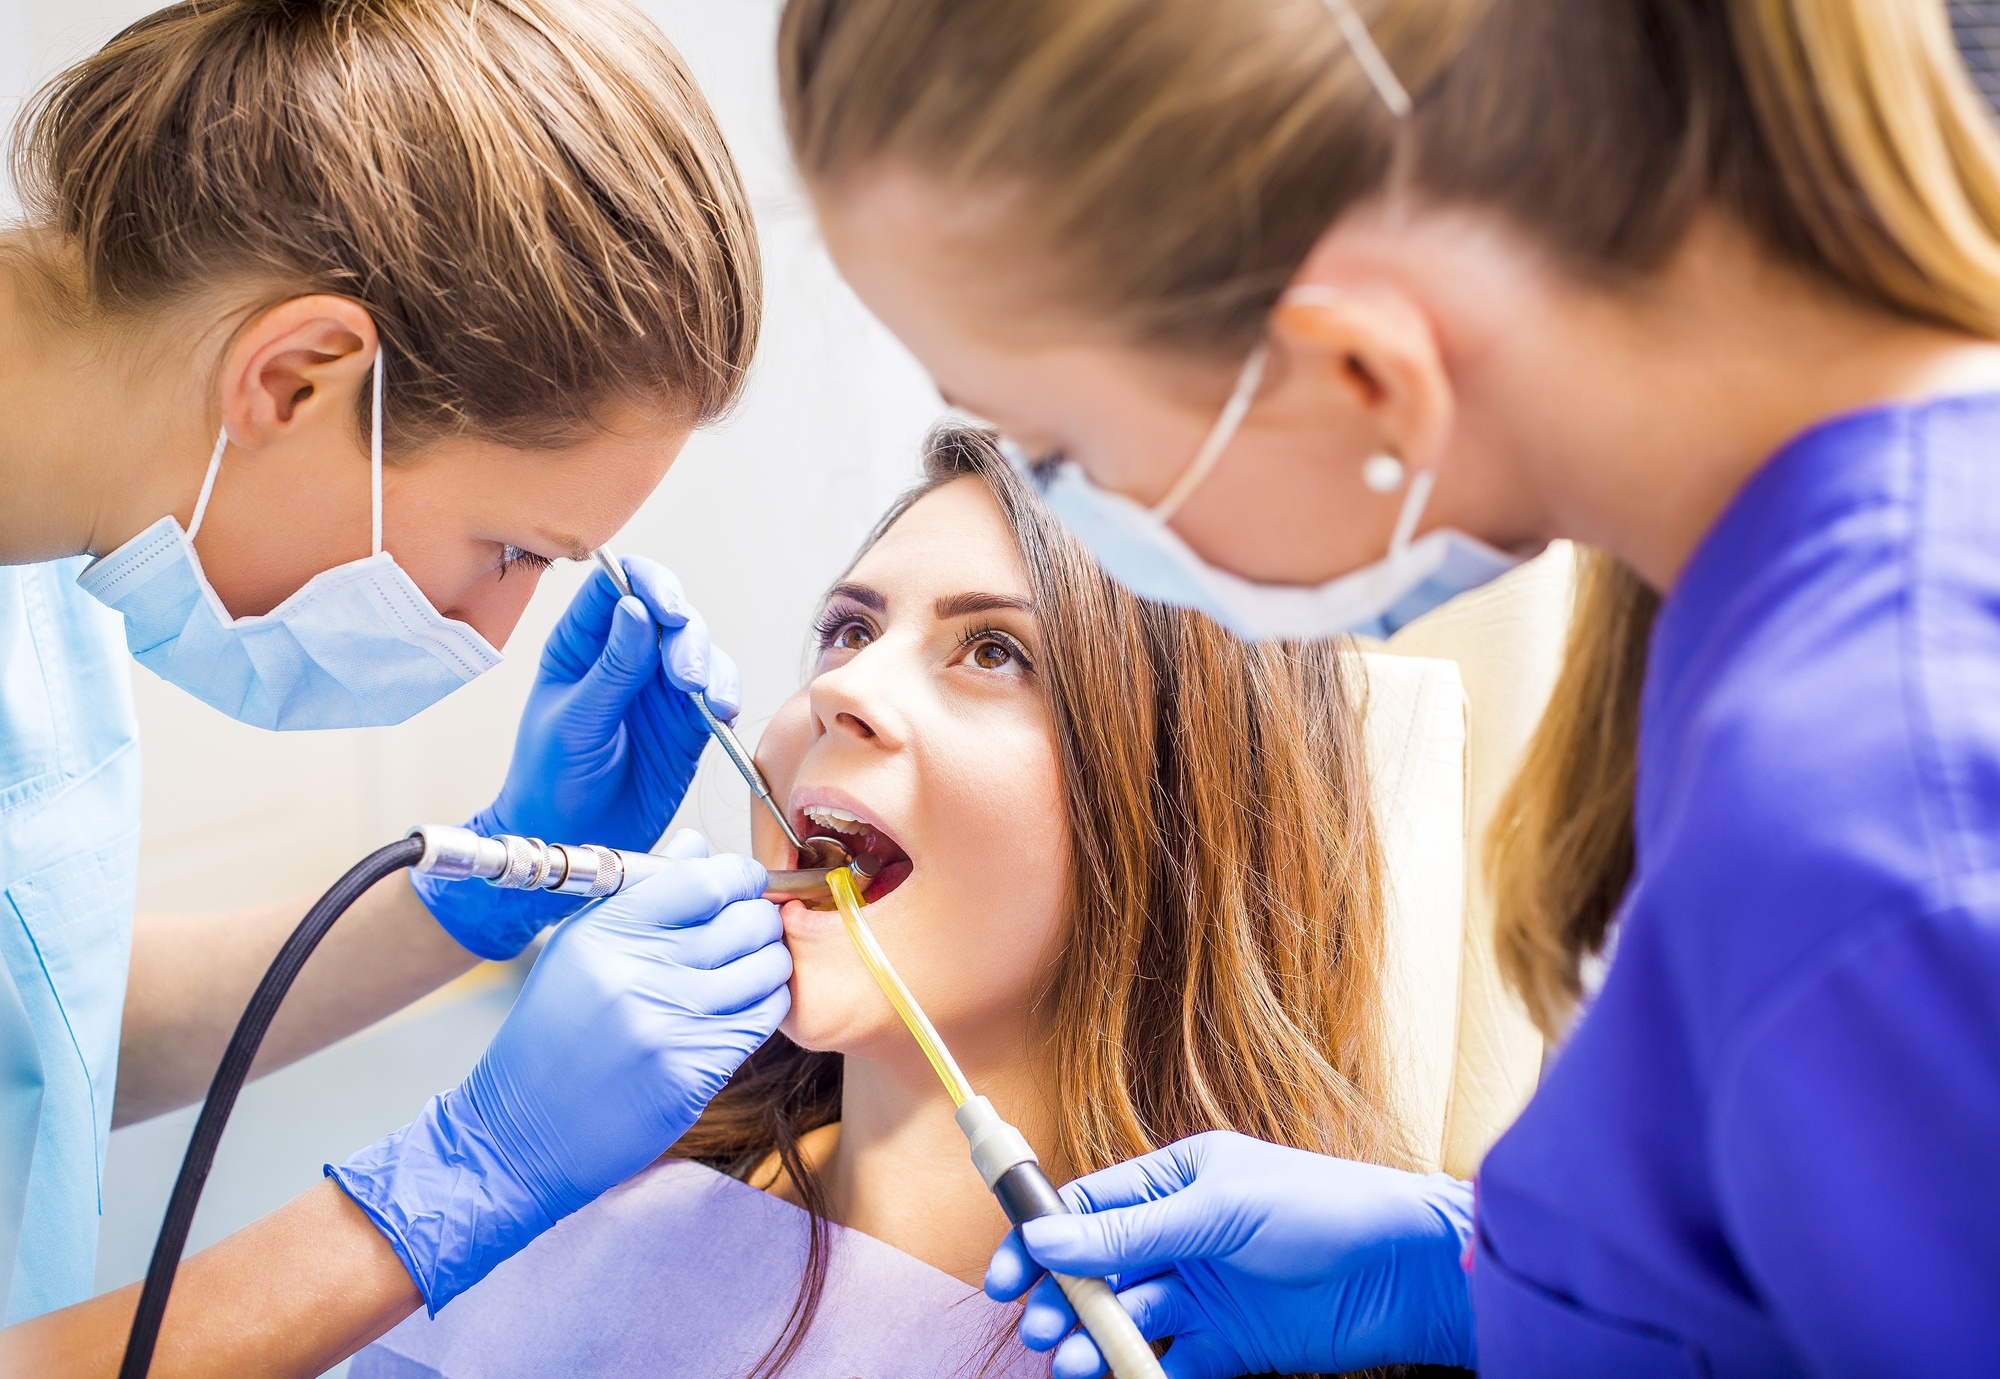 Why Regular Dental Check Ups Are Important